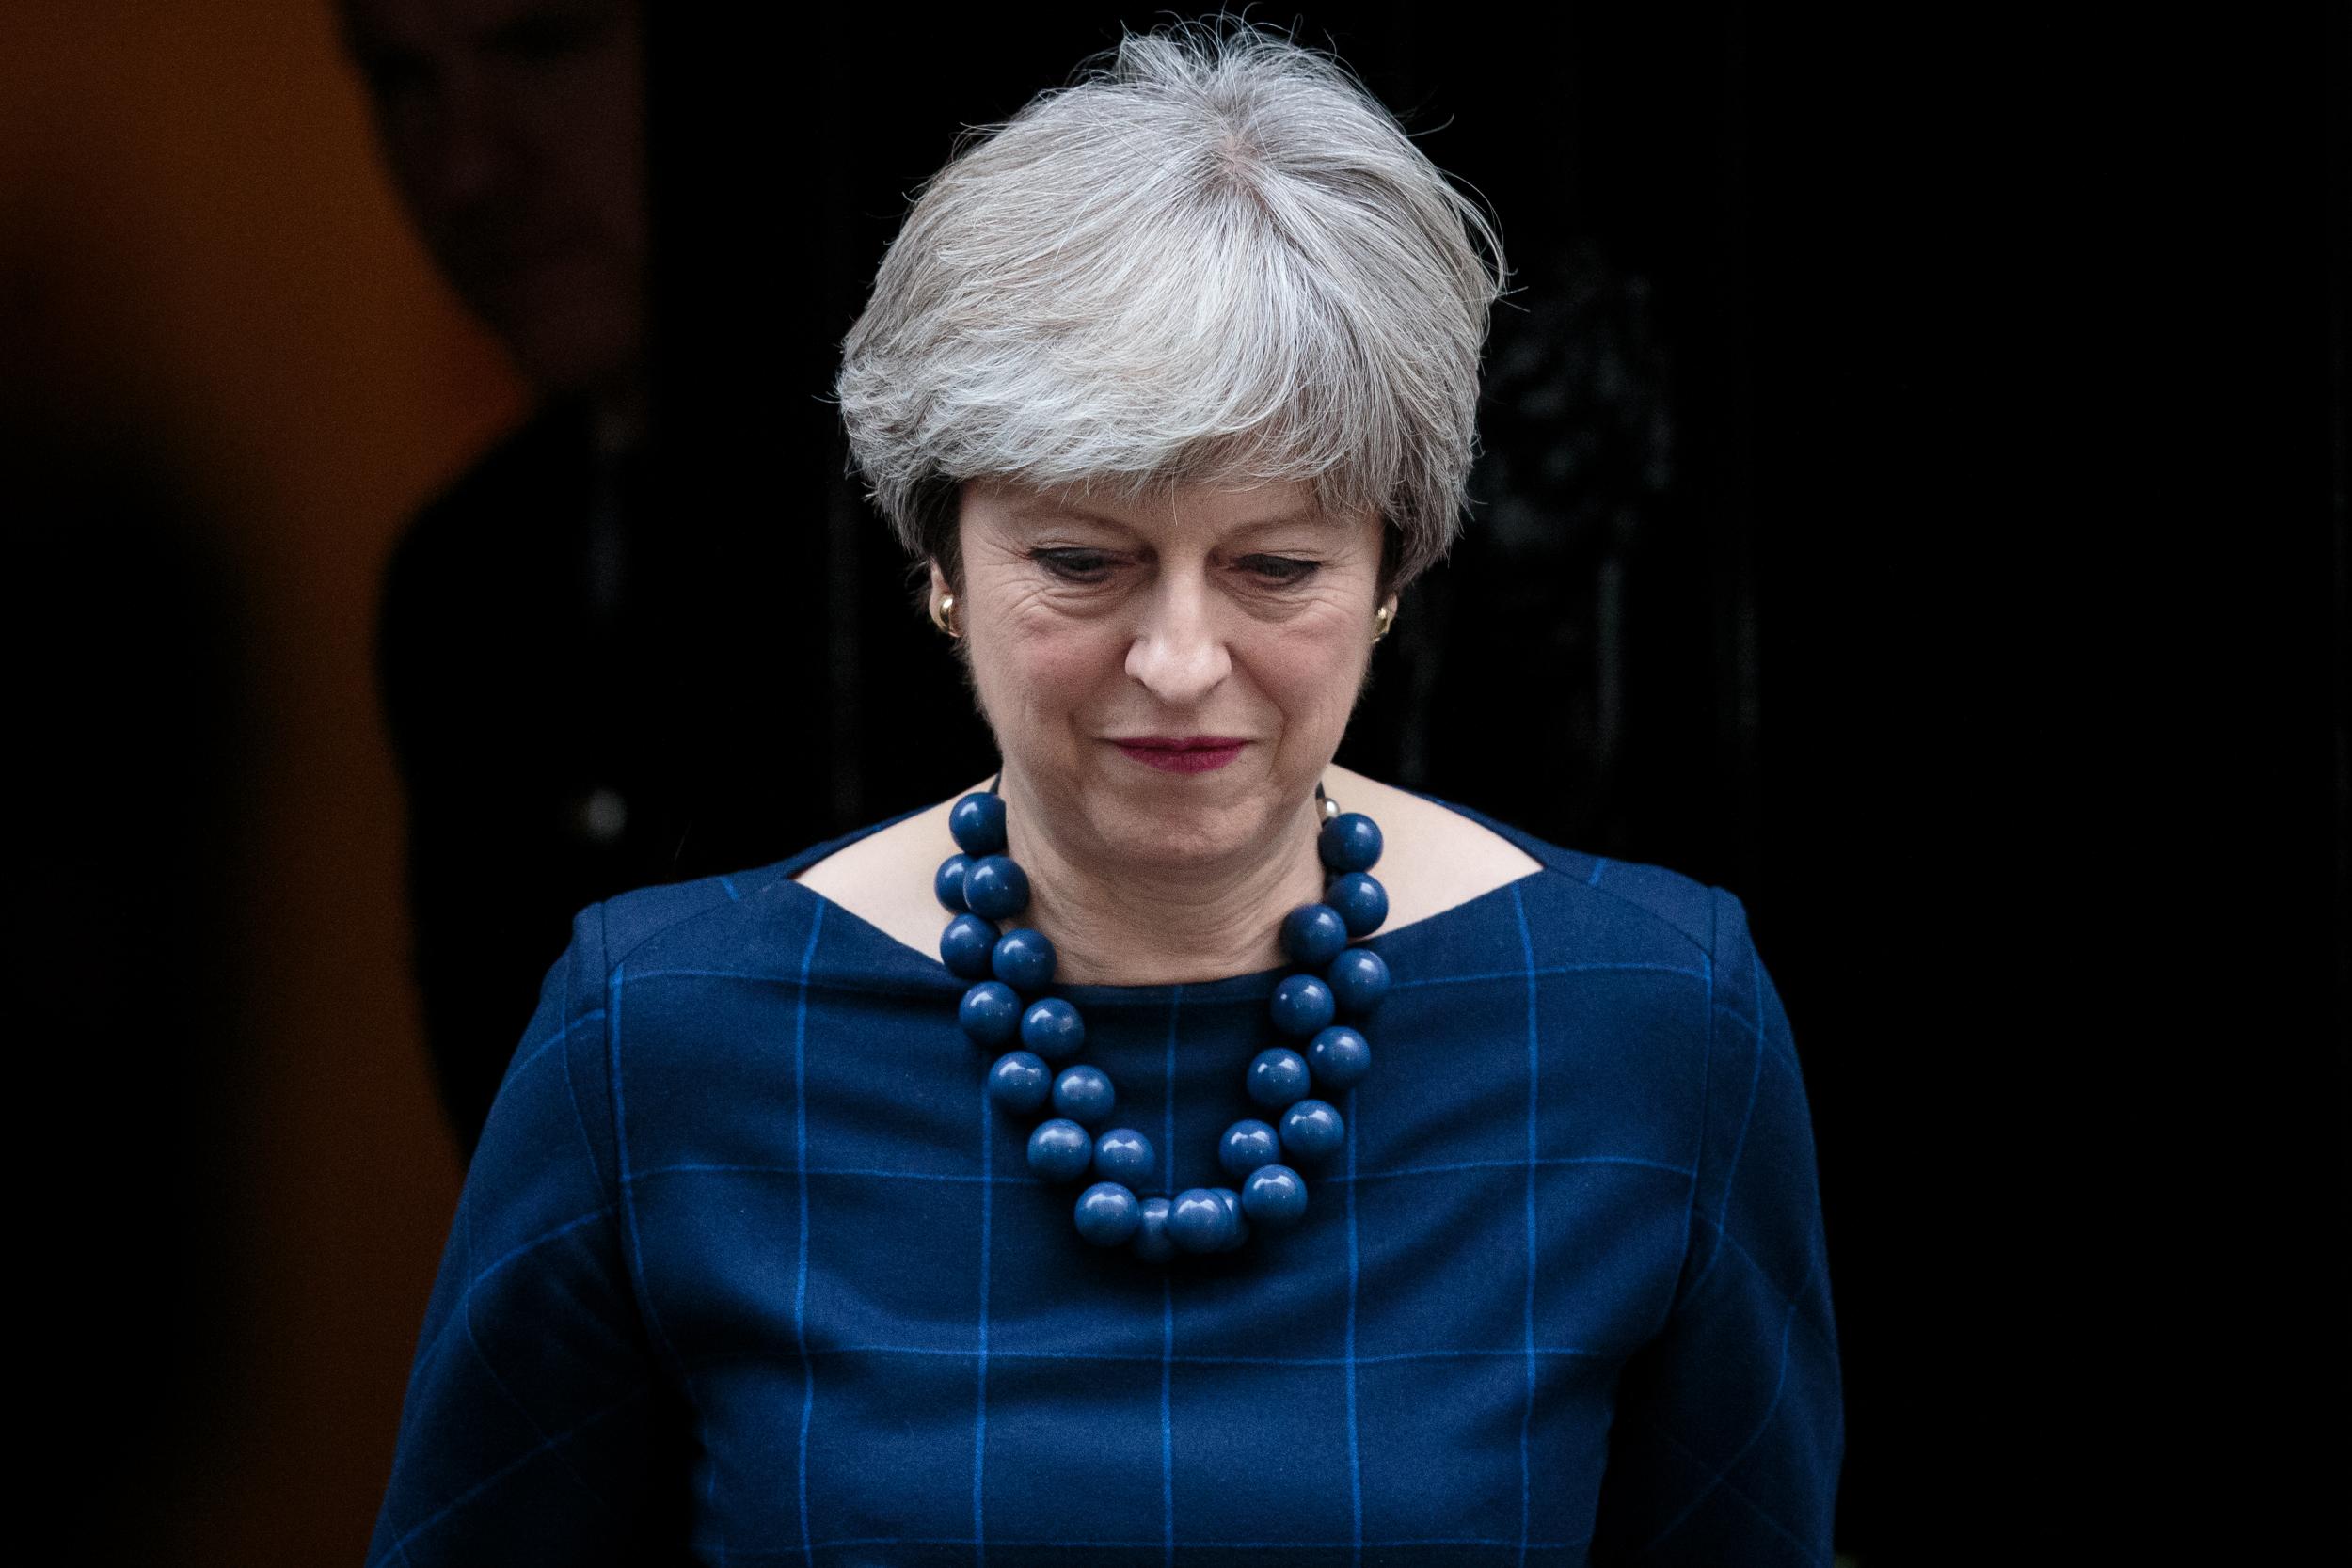 The PM insists the principles on which the Government is negotiating were set out in her Lancaster House and Florence speeches